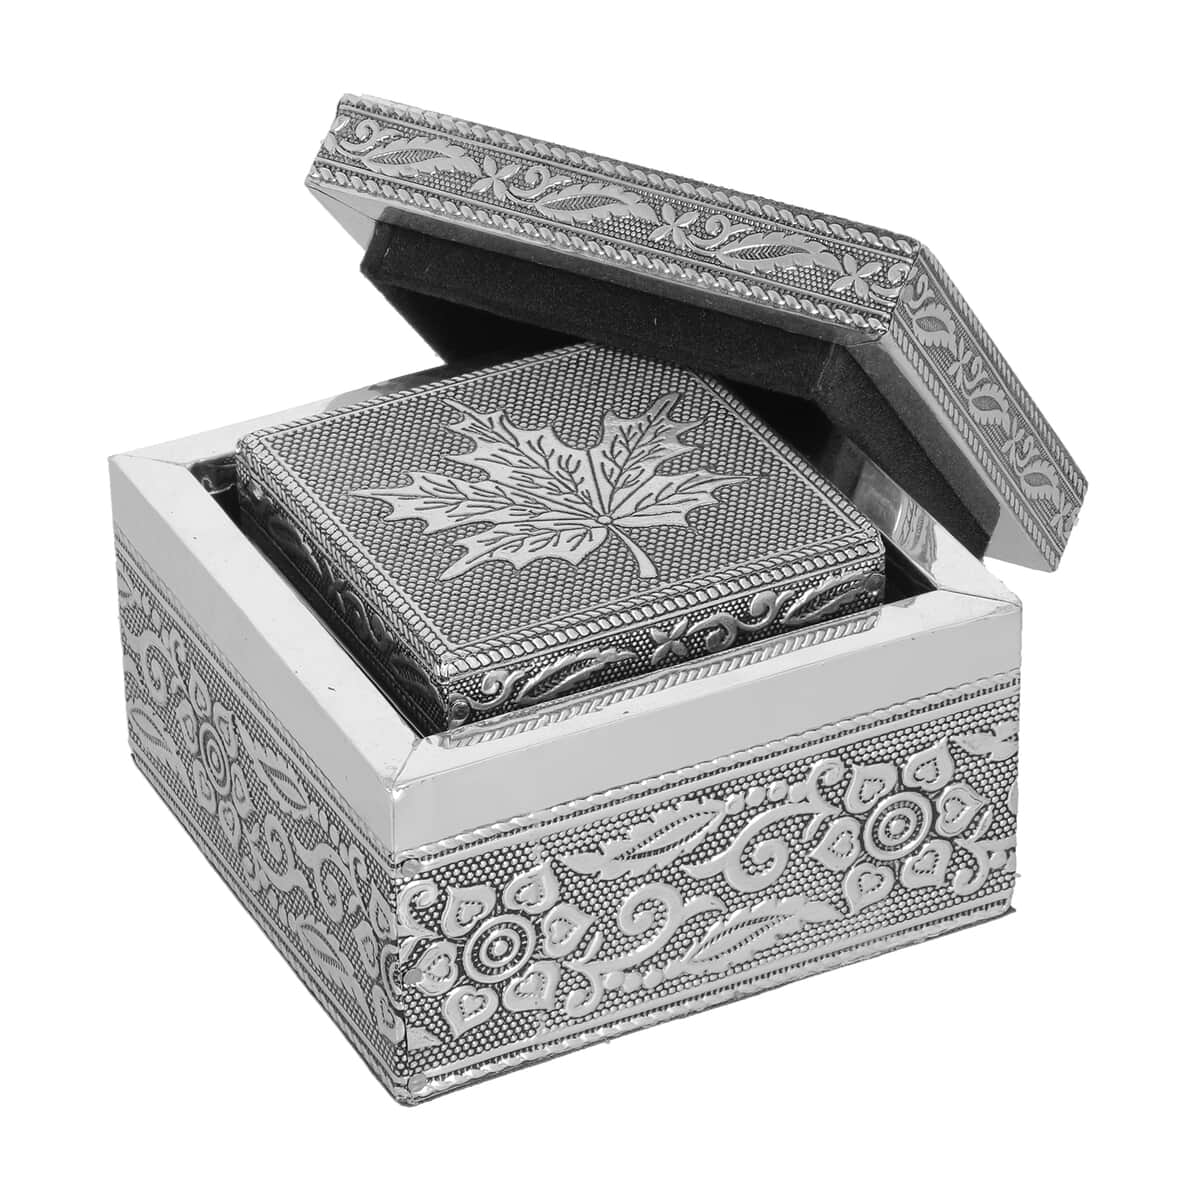 Set of 3 Handcrafted Maple Leafs Embossed Aluminum Oxidized Multi-Purpose Nested Box with Scratch Protection Interior (5,3.5,2.5 in) image number 3